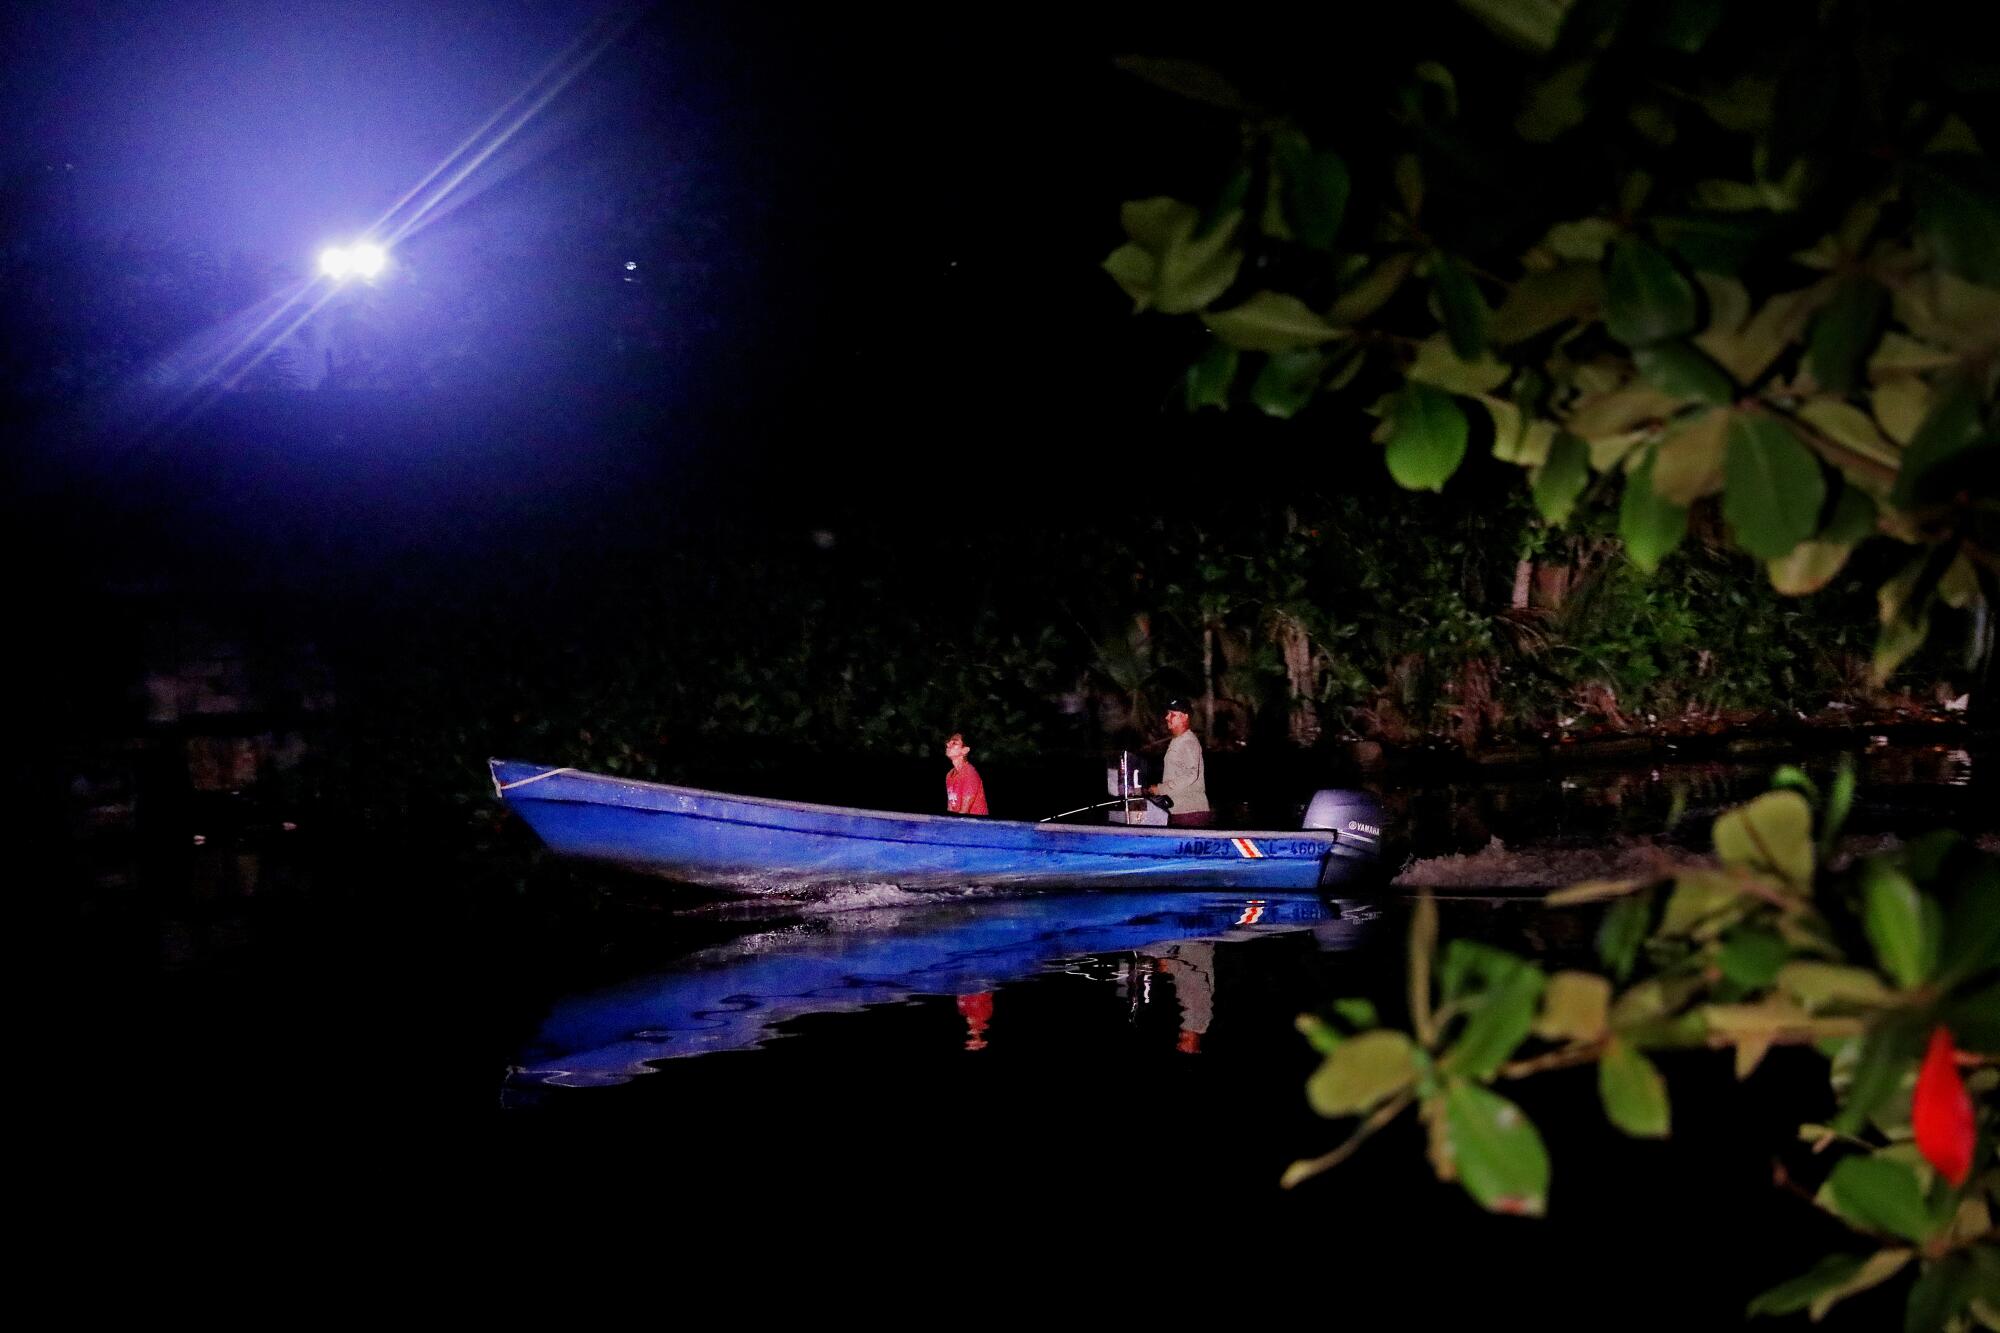 A boat with people aboard in dark waters near vegetation, illuminated by lights in the distance